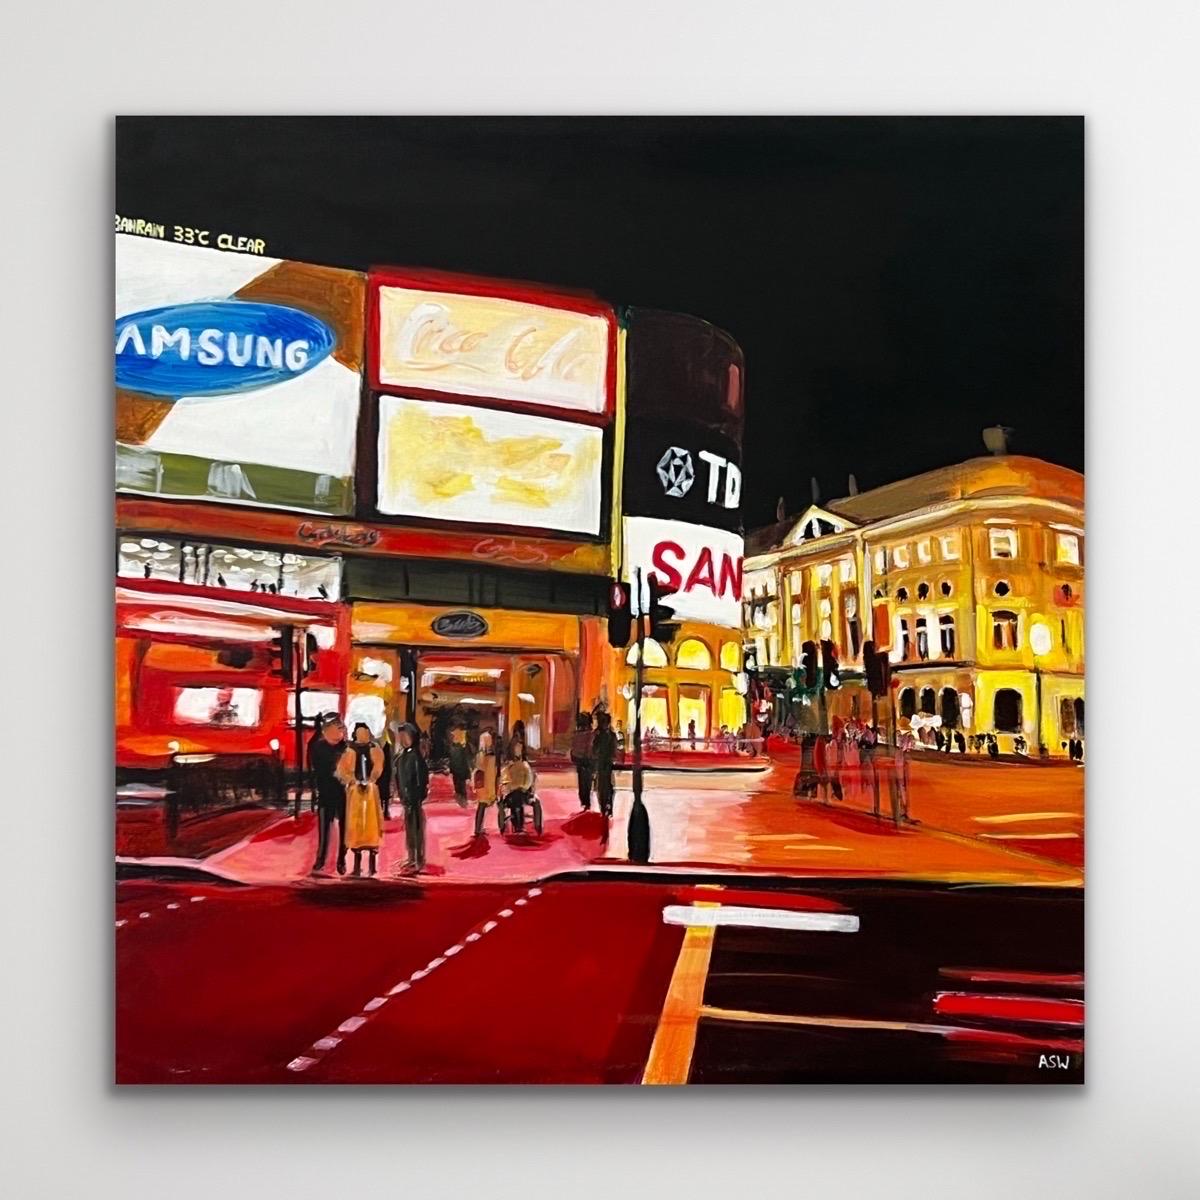 Piccadilly Circus in London City at Night with Red Bus by Urban Landscape Artist - Painting by Angela Wakefield